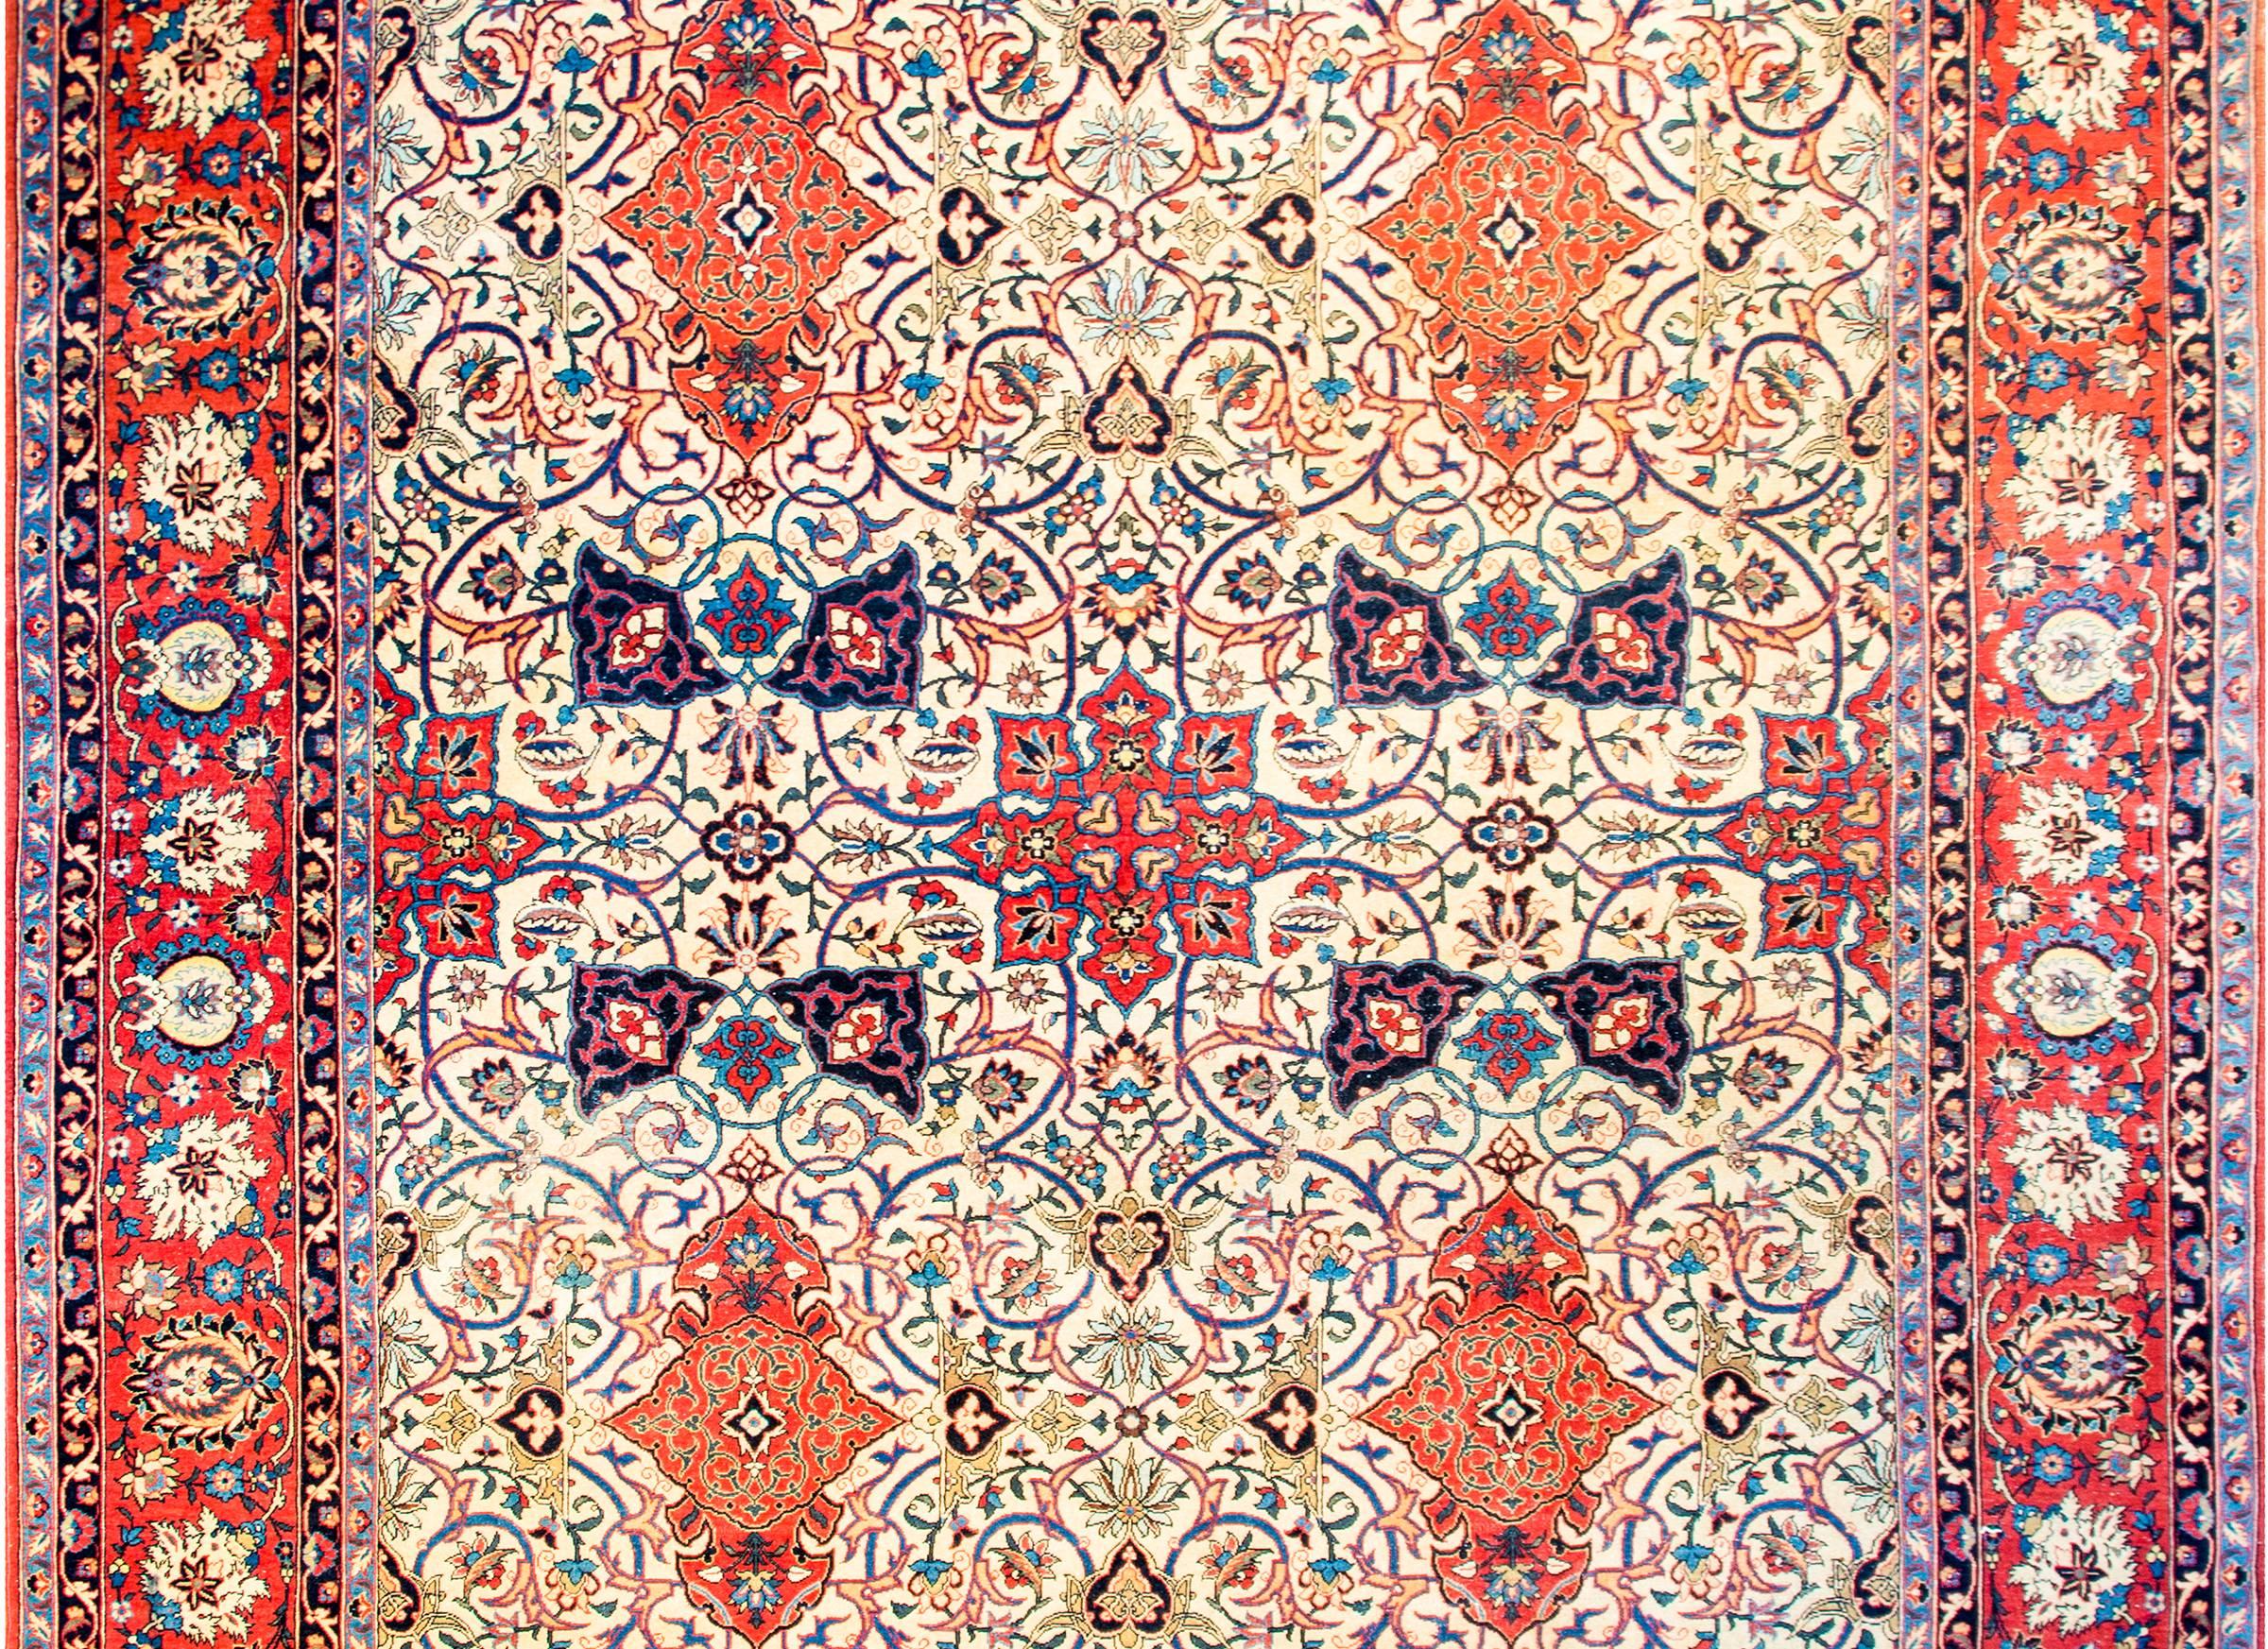 A mesmerizing early 20th century Persian Isfahan rug with an extraordinarily skilled woven pattern of intricately and tightly multicolored floral and scrolling vines, mirrored four ways, on a natural colored wool background. The border is complex